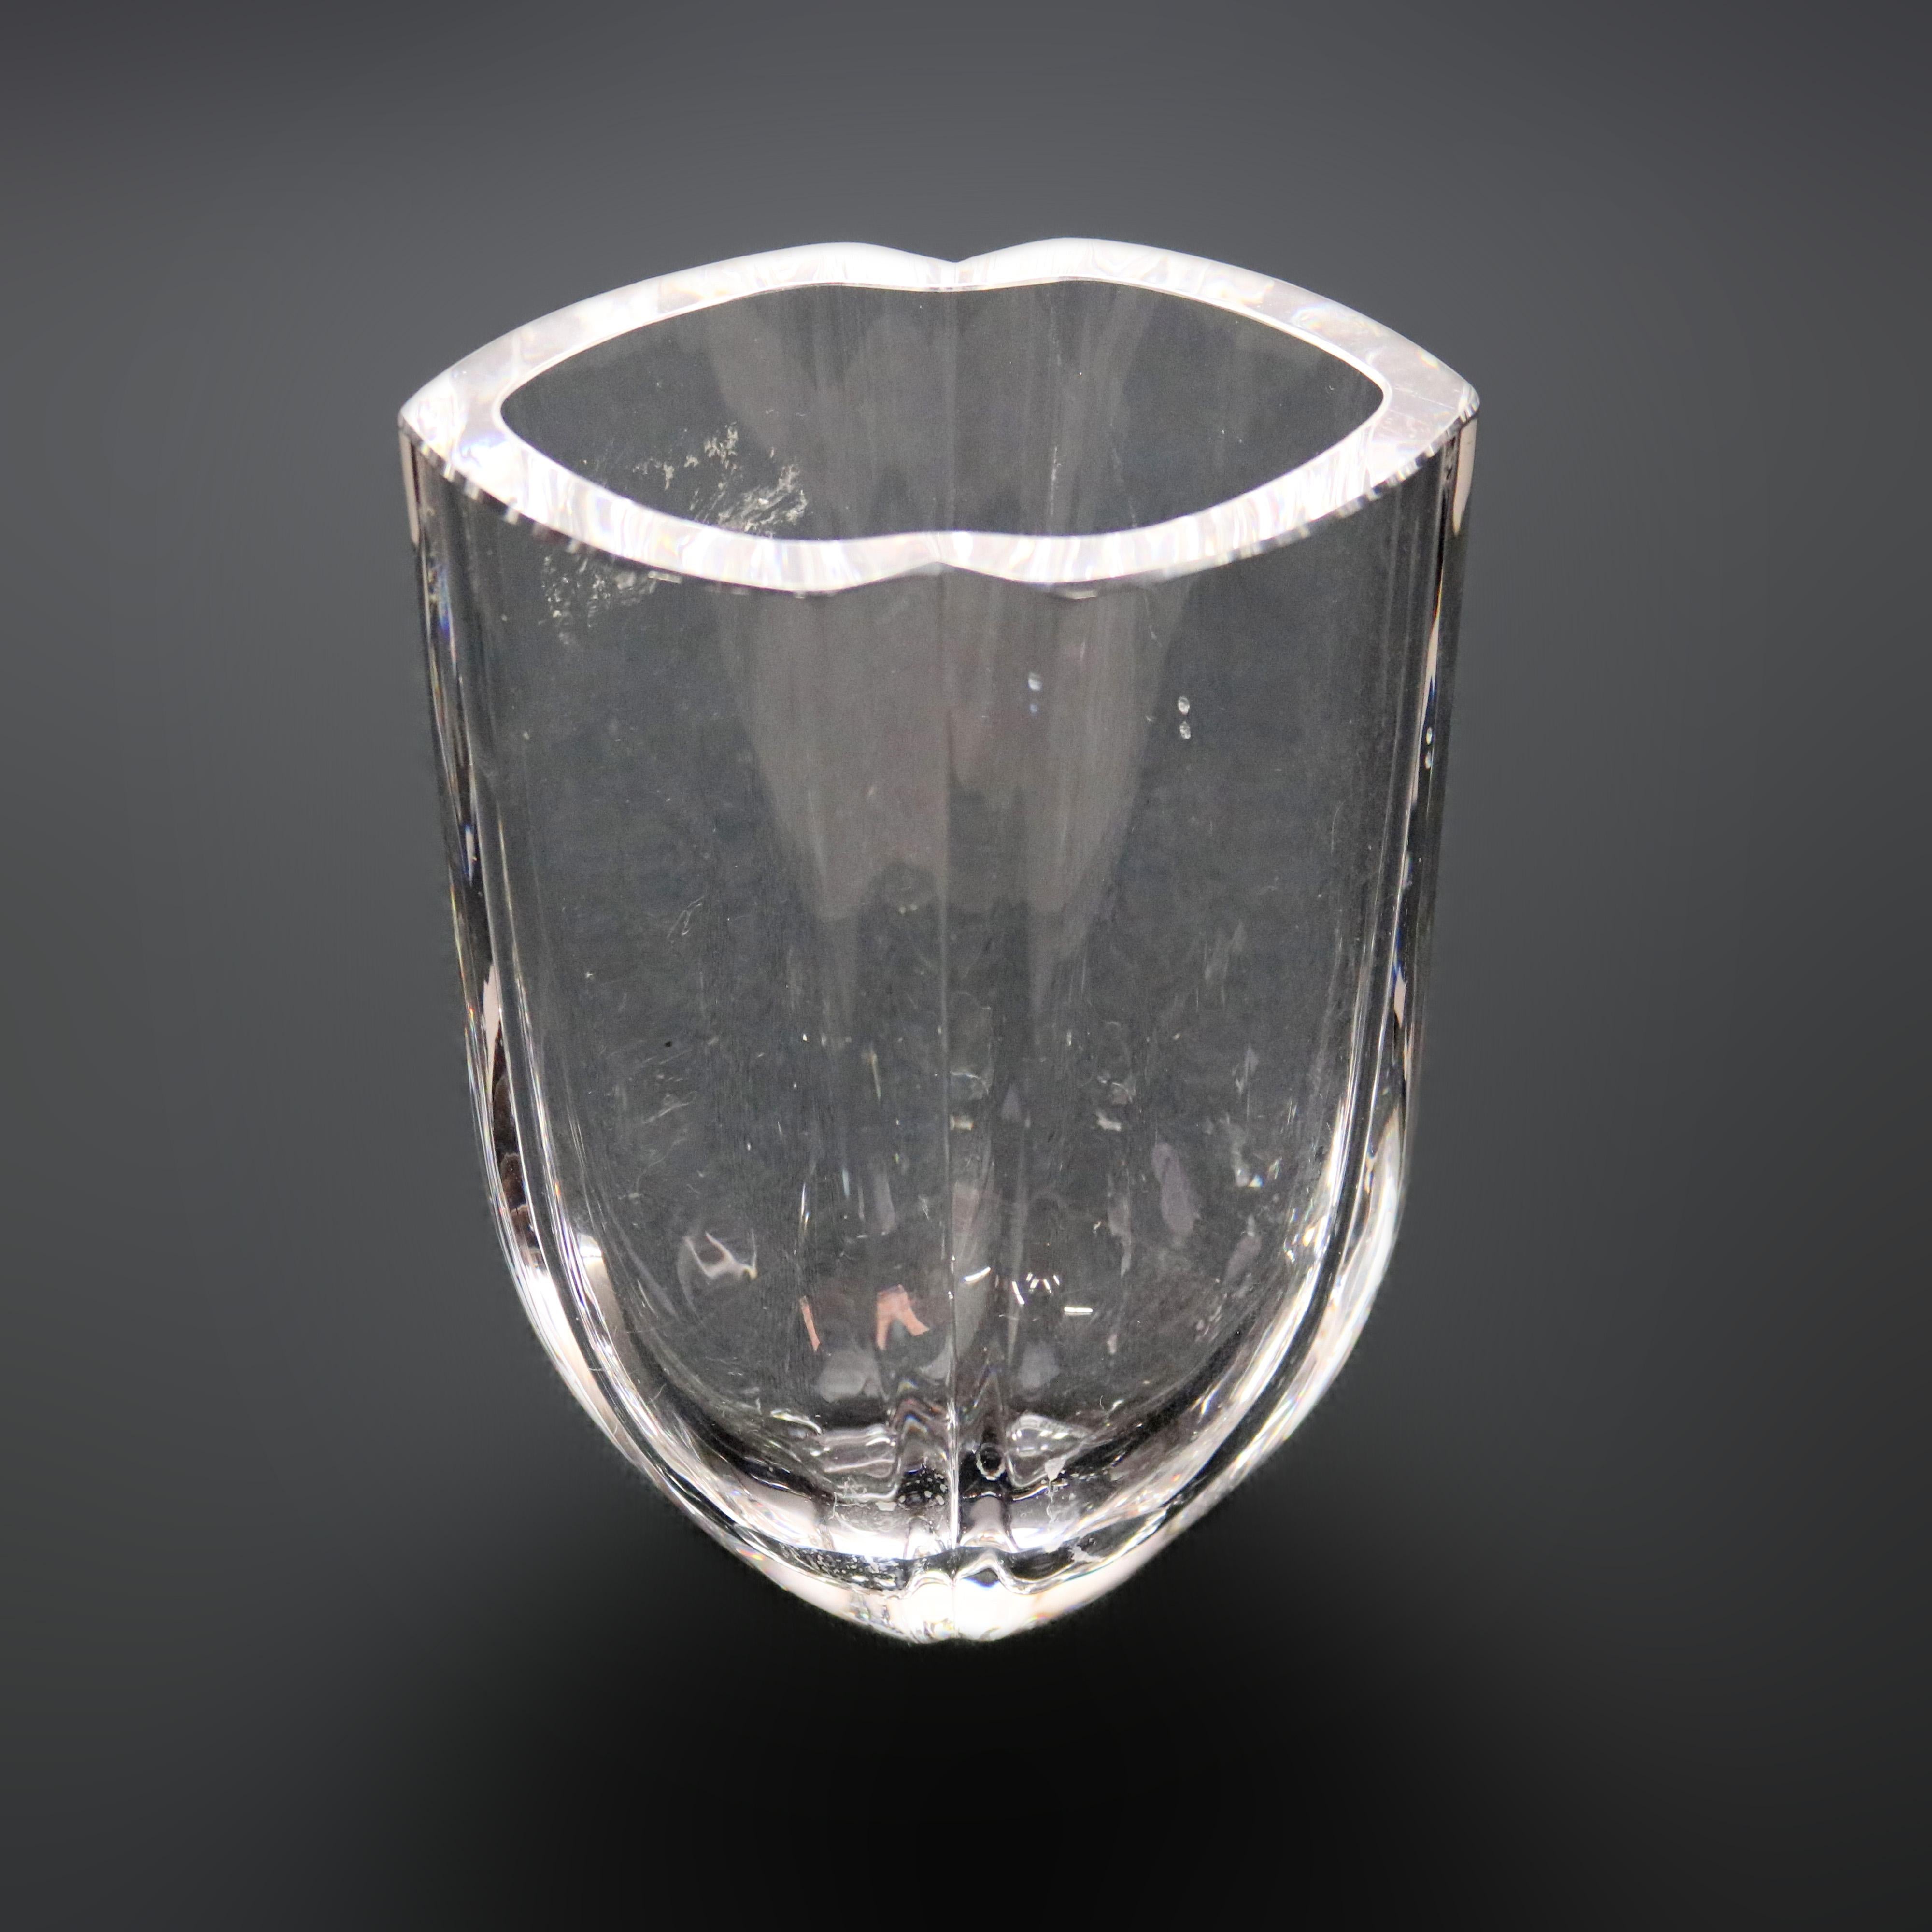 Swedish Kosta lead crystal flower vase, signed on base as photographed, 20th C.

Measures - 7.25'' H X 5.25'' W X 4'' D.